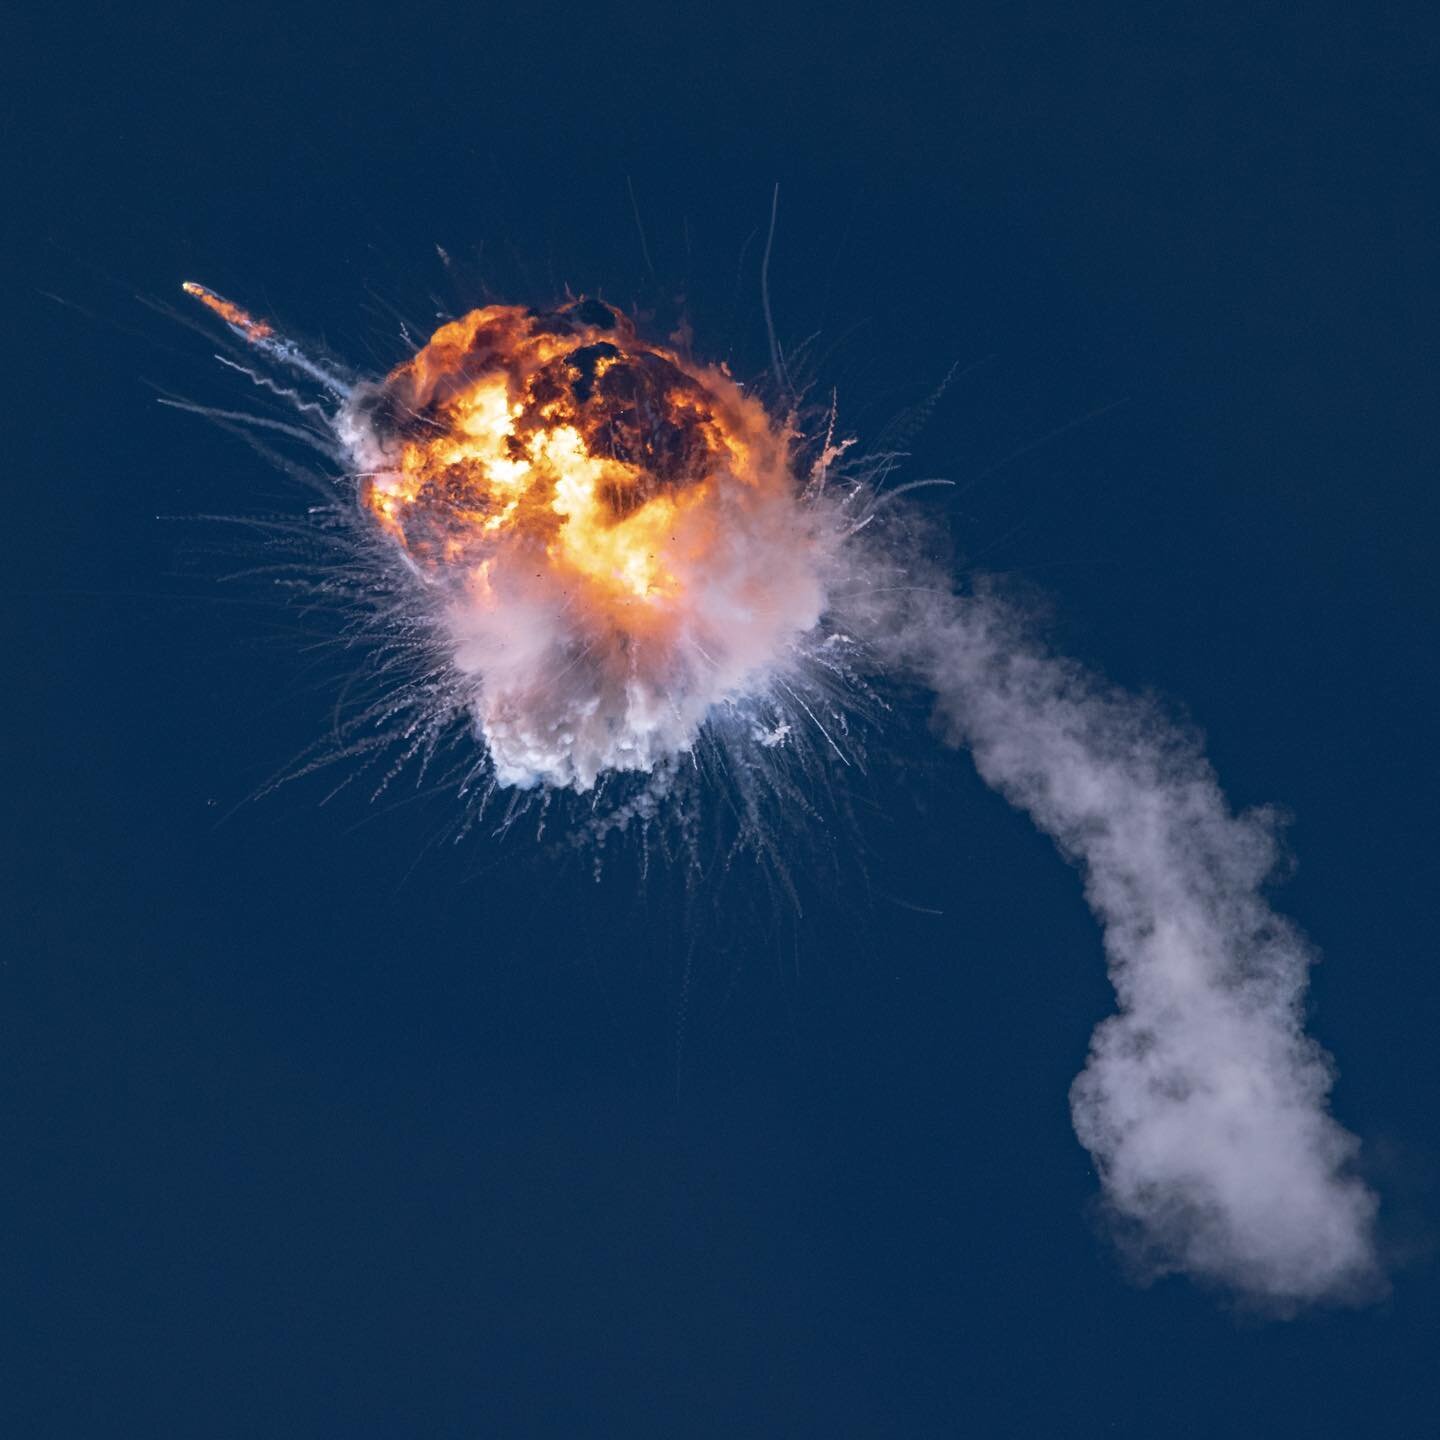 The explosive first launch of Firefly&rsquo;s Alpha rocket - One of four engines shut down early just after liftoff, resulting in a slower than nominal ascent and eventual loss of control of the vehicle as it hit Max Q. Range safety officers detonate